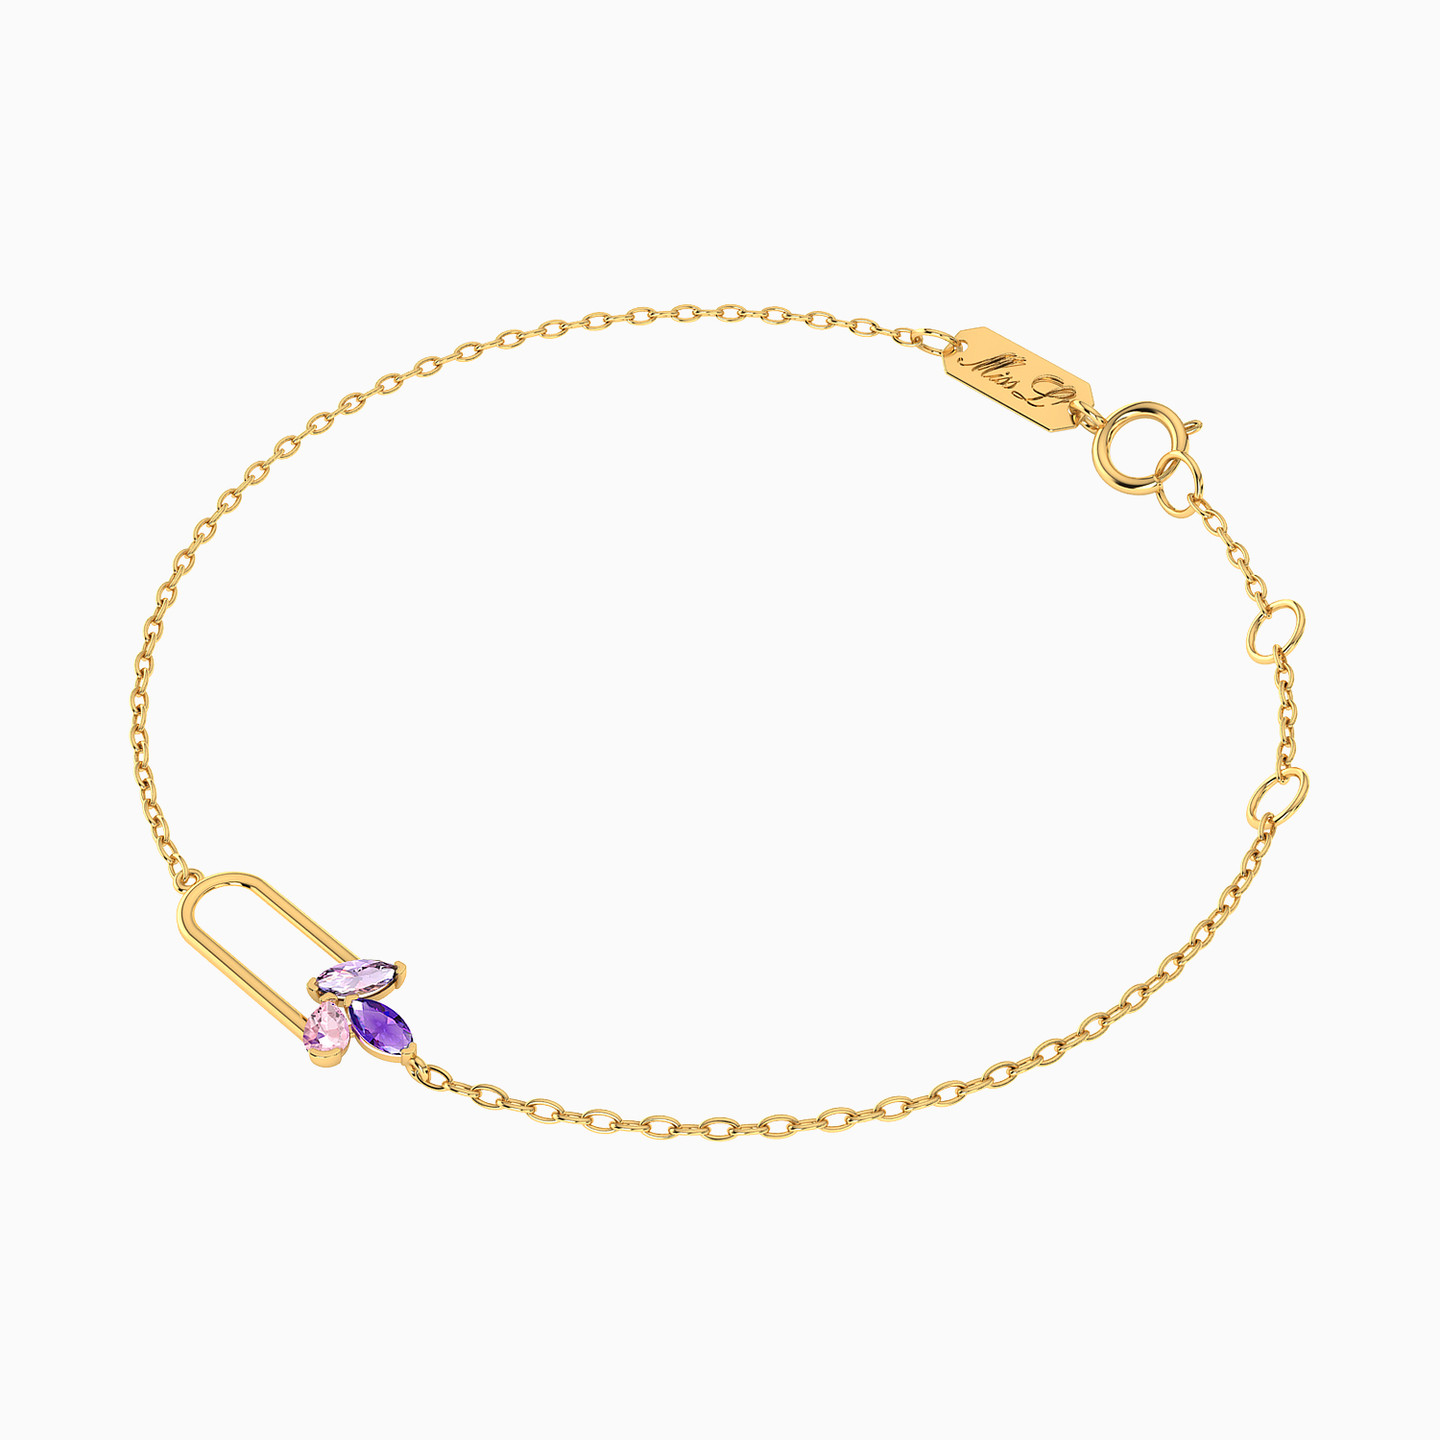 Oval Colored Stones Chain Bracelet in 18K Gold - 2